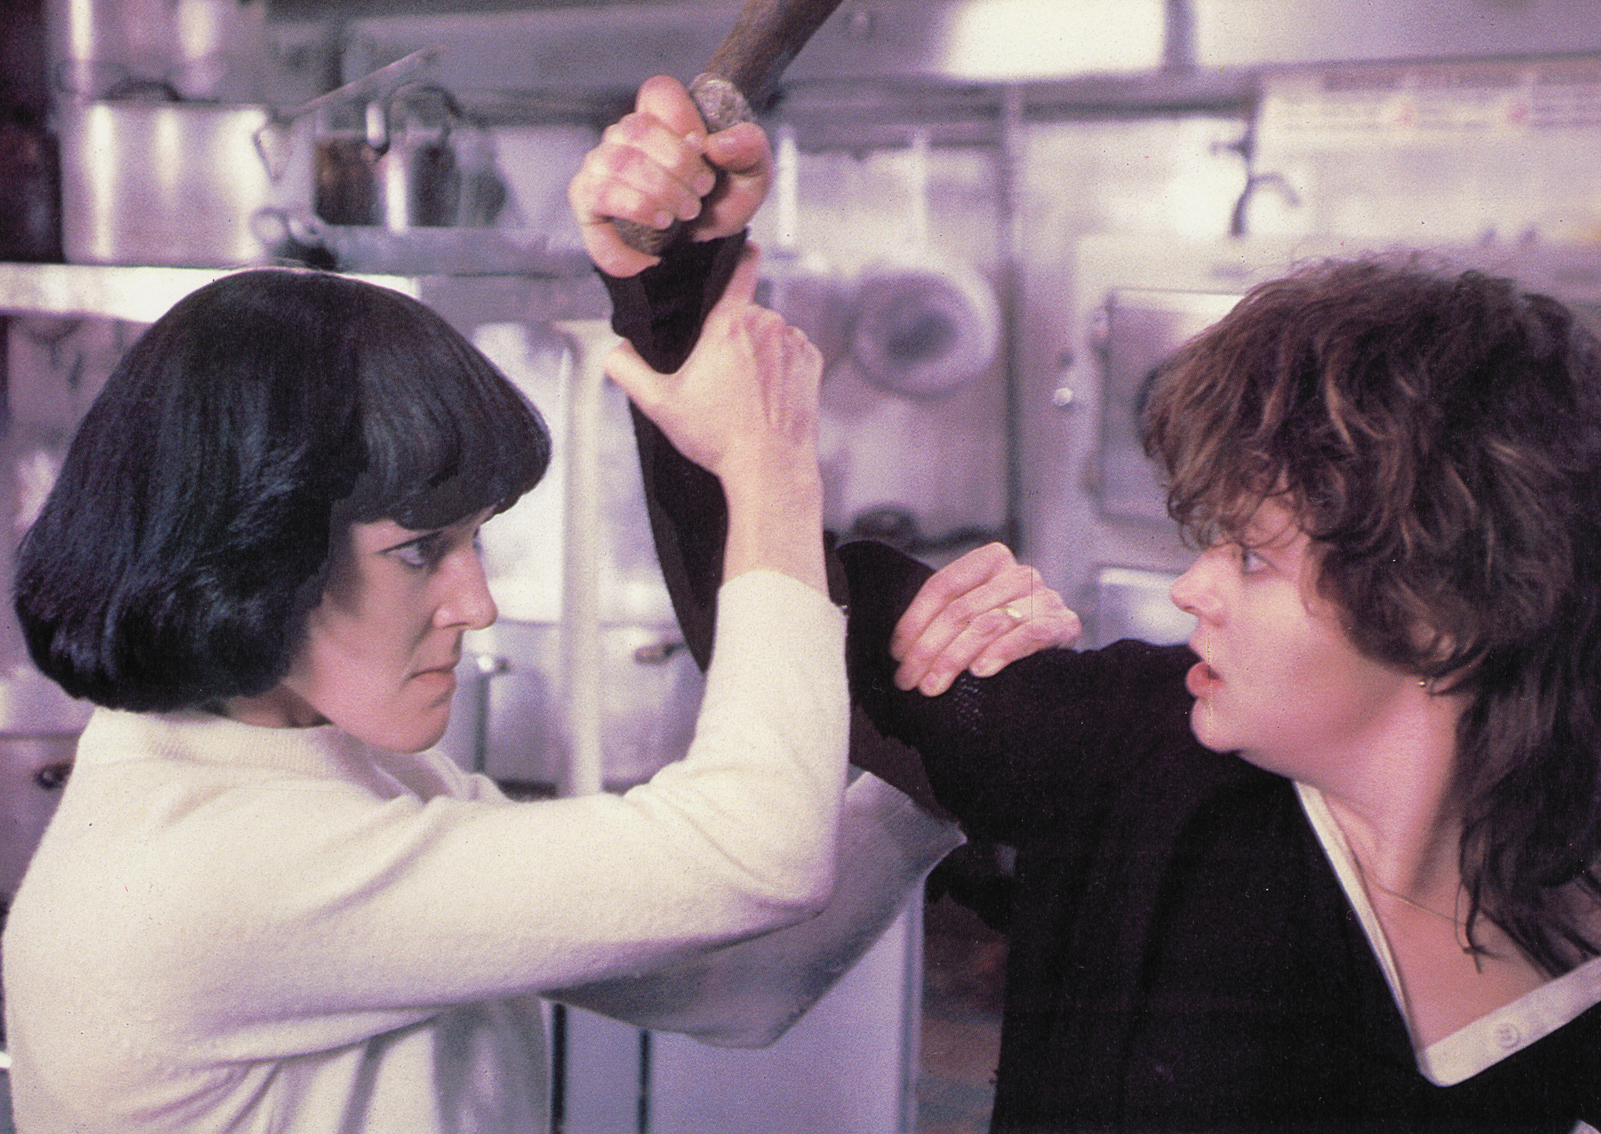 Two women stand together in a combative pose. The one on the left, wearing a white jumper, holds the right's arm. The one on the right, wearing a black jumper, raises a wooden club in their right arm.